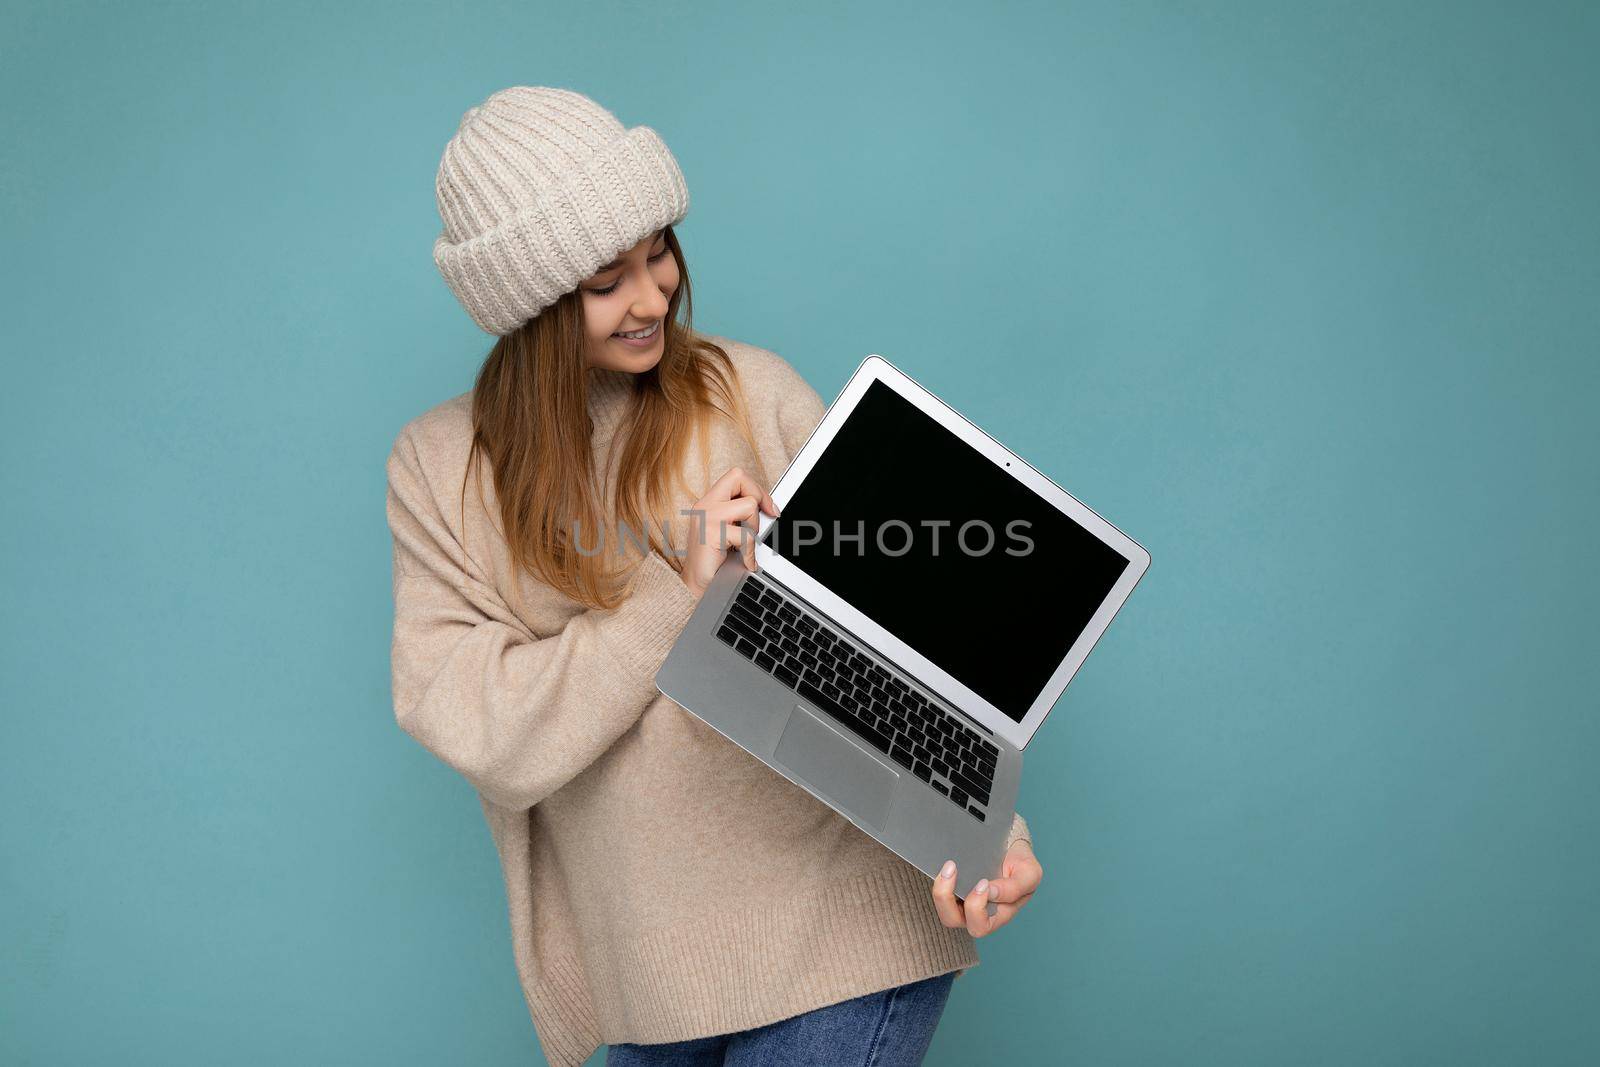 photo shot of beautiful charming fascinating pretty smiling happy young dark blond woman in winter warm knitted beige hat holding computer laptop looking at netbook empty free copy space monitor and keyboard wearing beige winter sweater isolated over light blue wall background in studio. Mock up, copy space, empty space for advertisement.